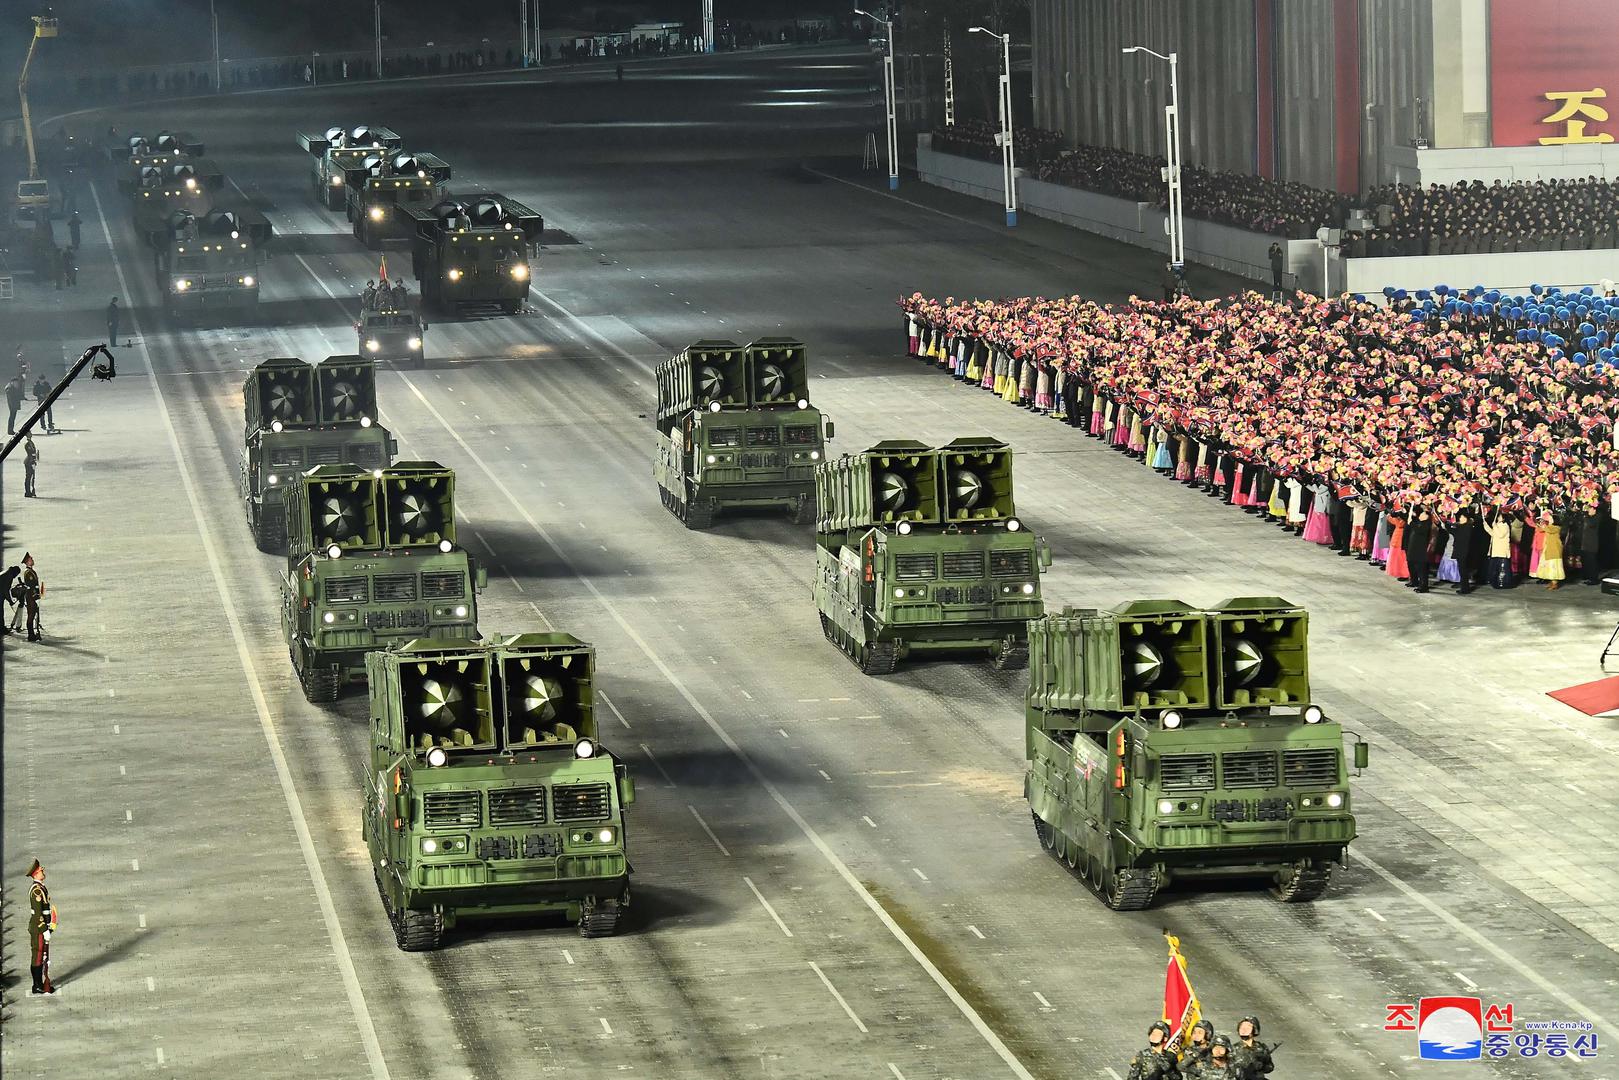 8th Congress of the Workers' Party in Pyongyang Military equipments are seen during a military parade to commemorate the 8th Congress of the Workers' Party in Pyongyang, North Korea January 14, 2021 in this photo supplied by North Korea's Central News Agency (KCNA).    KCNA via REUTERS    ATTENTION EDITORS - THIS IMAGE WAS PROVIDED BY A THIRD PARTY. REUTERS IS UNABLE TO INDEPENDENTLY VERIFY THIS IMAGE. NO THIRD PARTY SALES. SOUTH KOREA OUT. NO COMMERCIAL OR EDITORIAL SALES IN SOUTH KOREA. KCNA